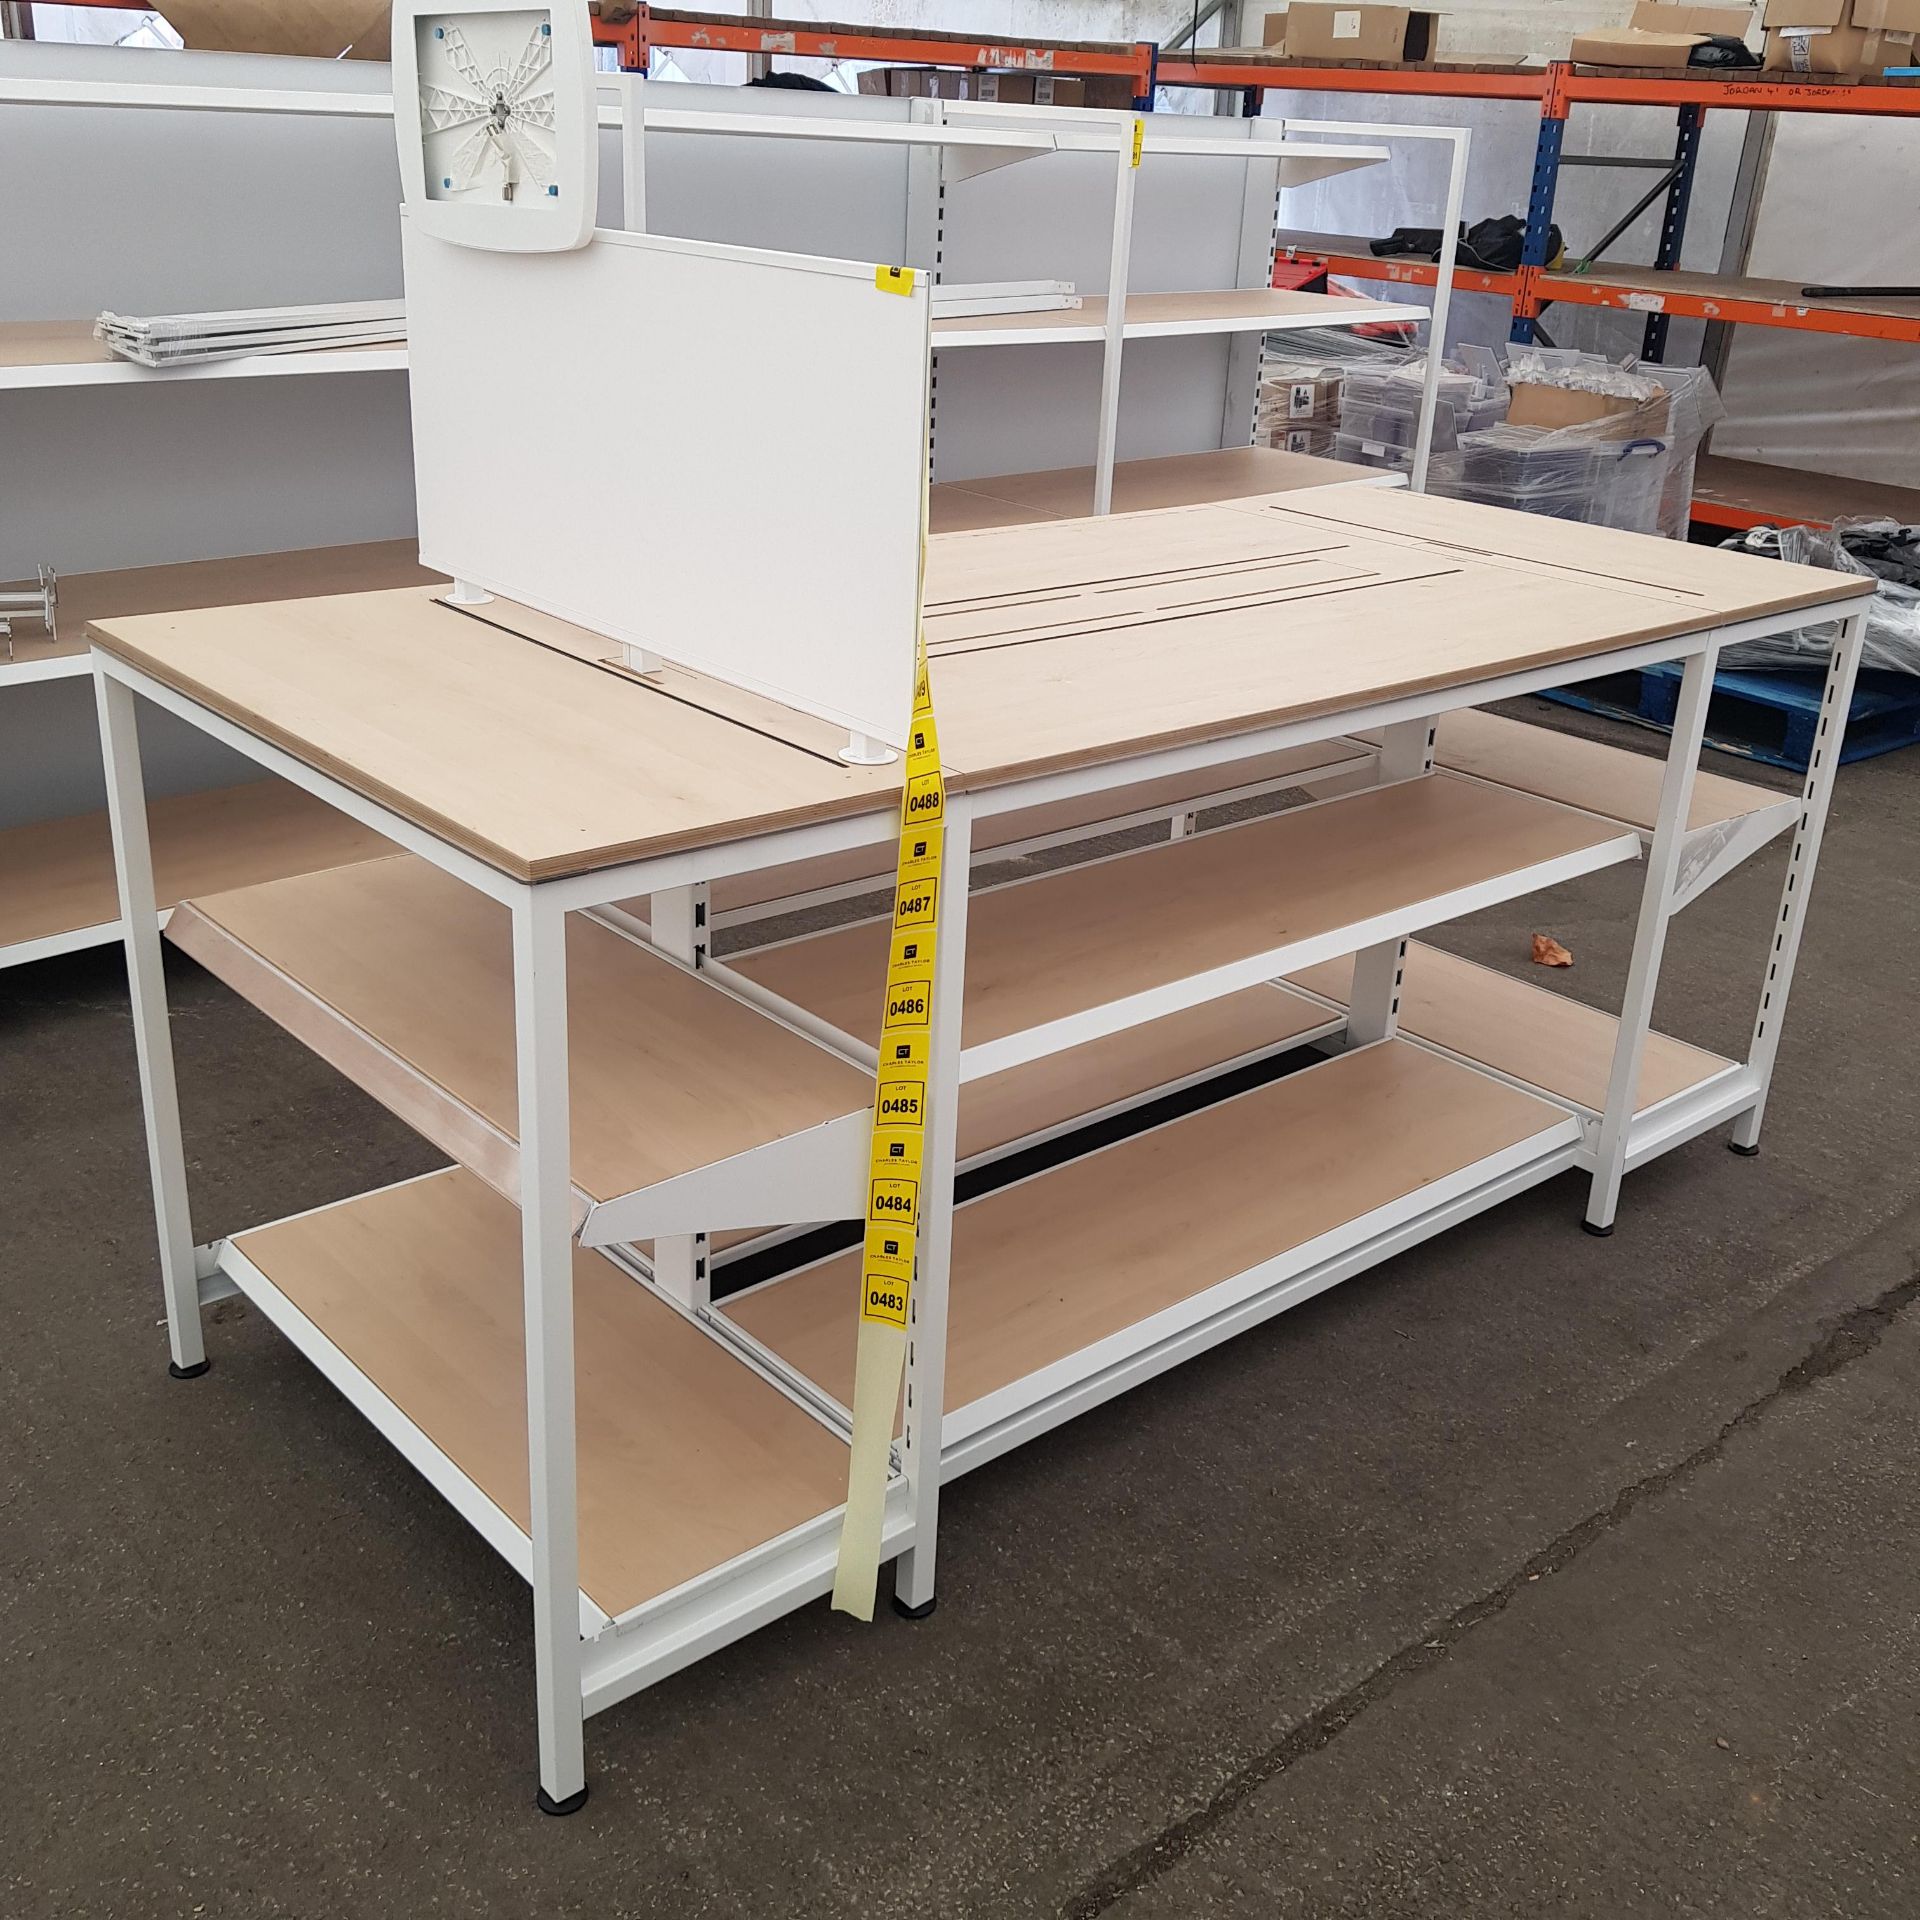 1 X BAY TABLE WITH 2 TIER UNDER SHELVING WOOD BOARDS (0.95m H x 2.22m L x 0.95m W)